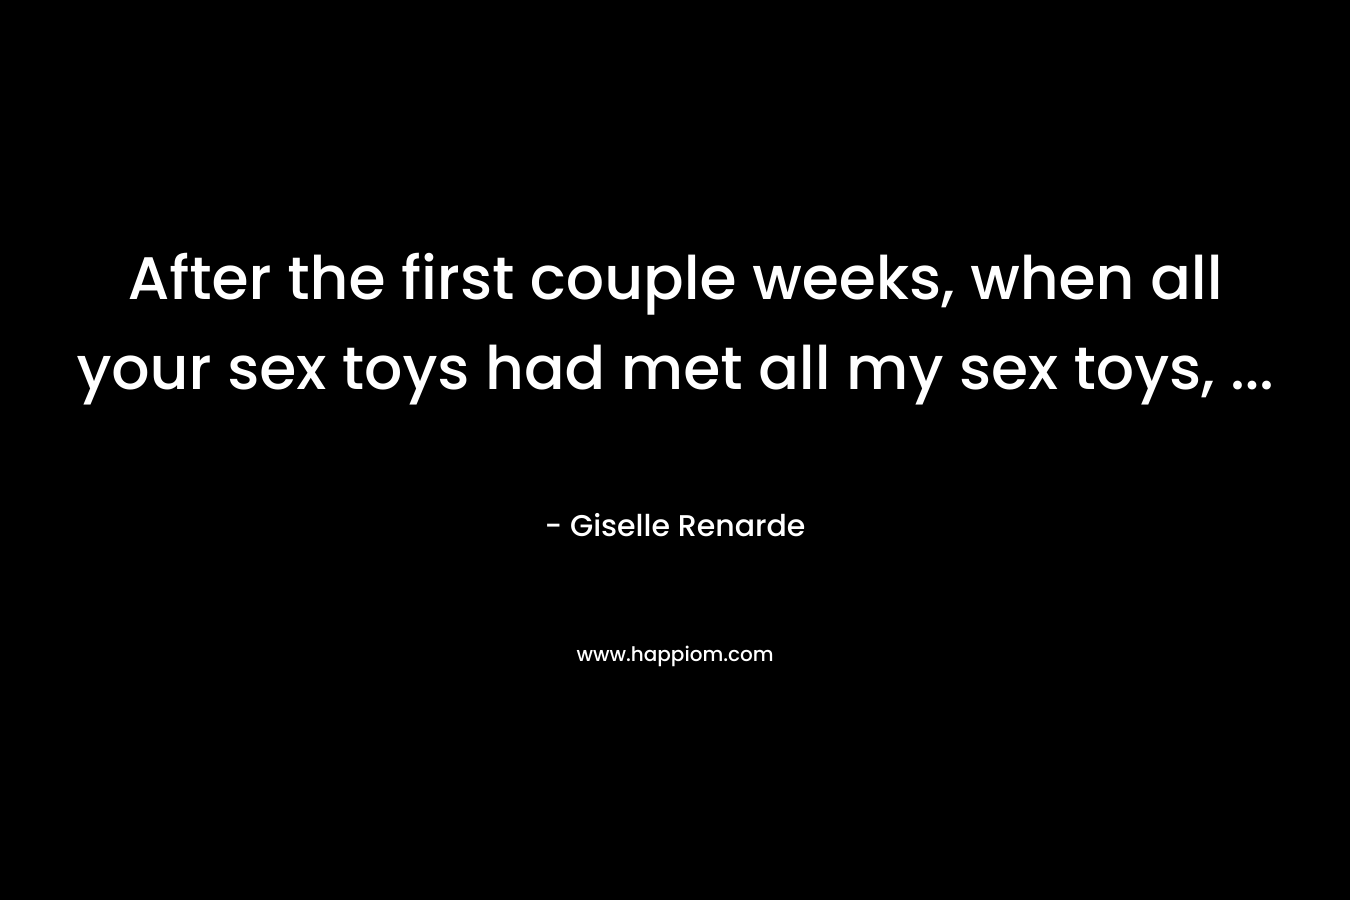 After the first couple weeks, when all your sex toys had met all my sex toys, … – Giselle Renarde